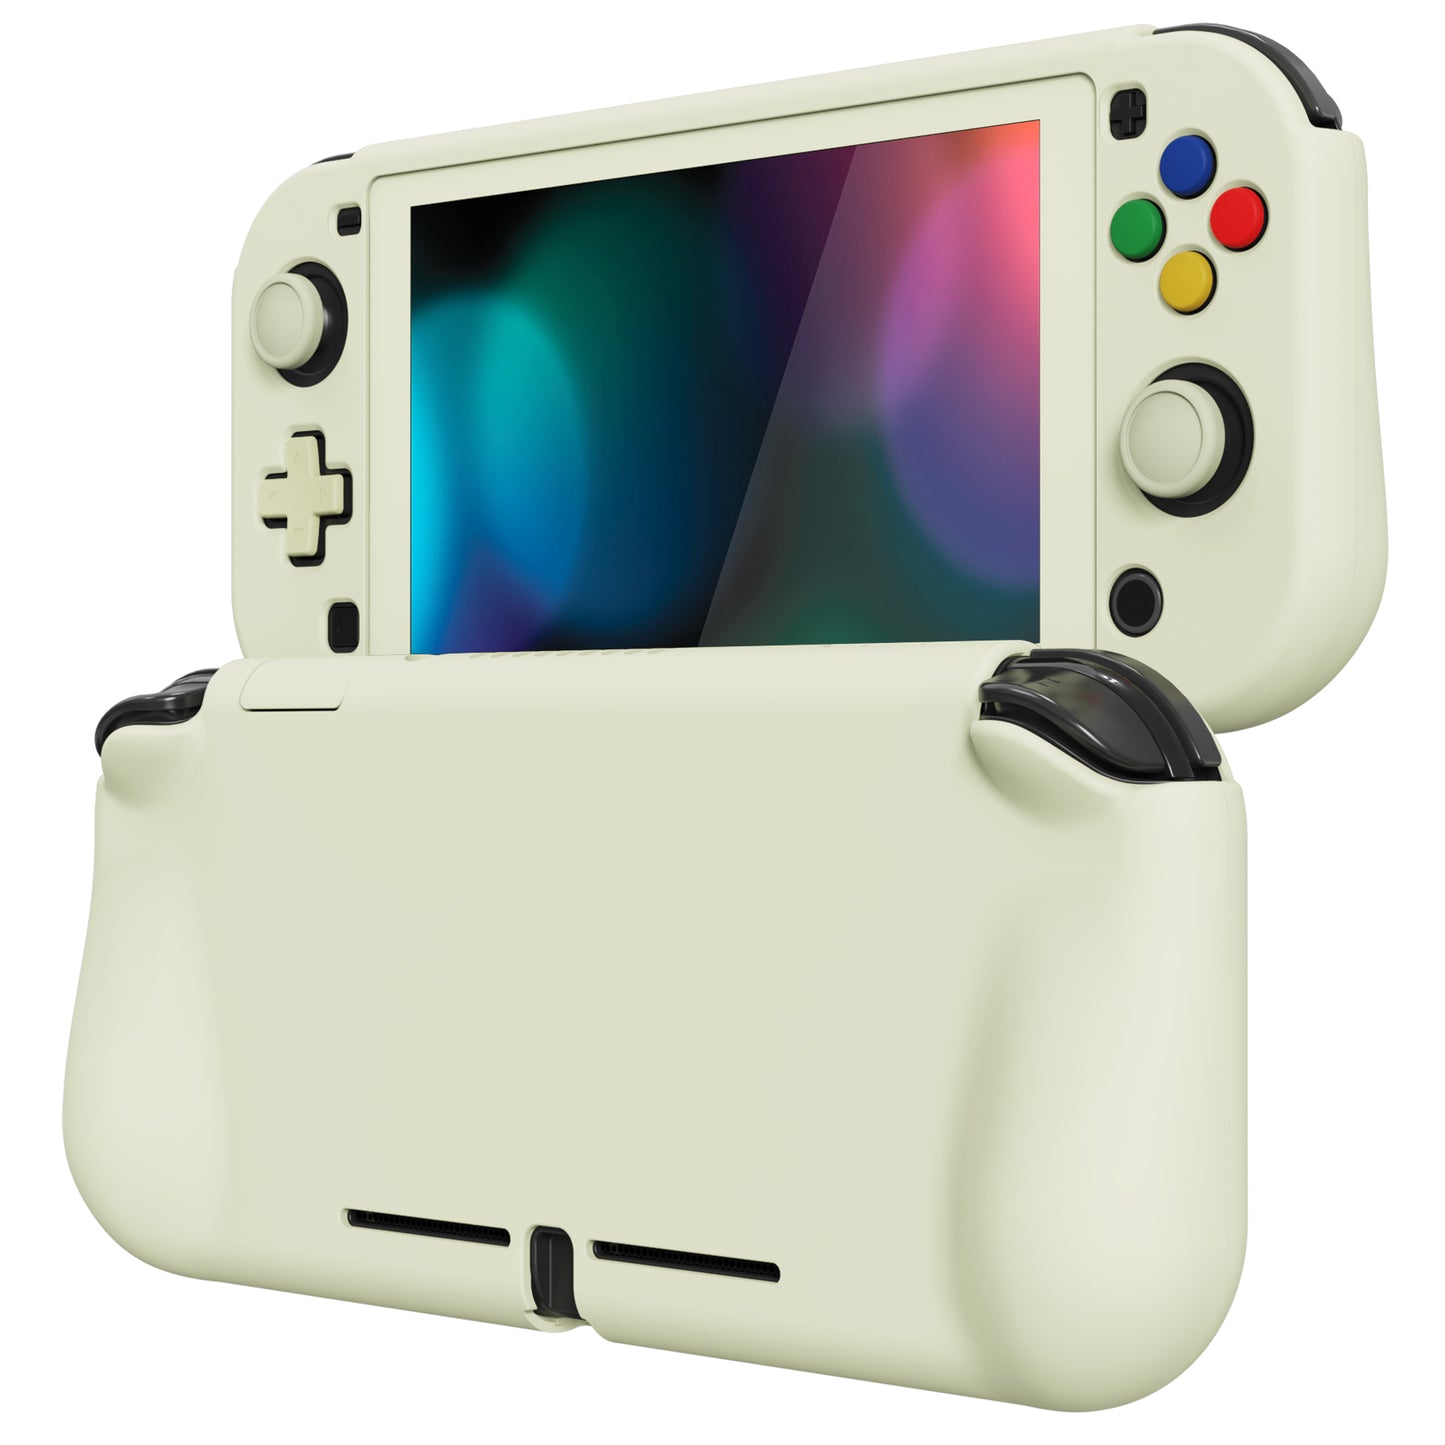 PlayVital ZealProtect Protective Case for Nintendo Switch Lite, Hard Shell Ergonomic Grip Cover for Nintendo Switch Lite w/Screen Protector & Thumb Grip Caps & Button Caps - Antique Yellow - PSLYP3006 playvital